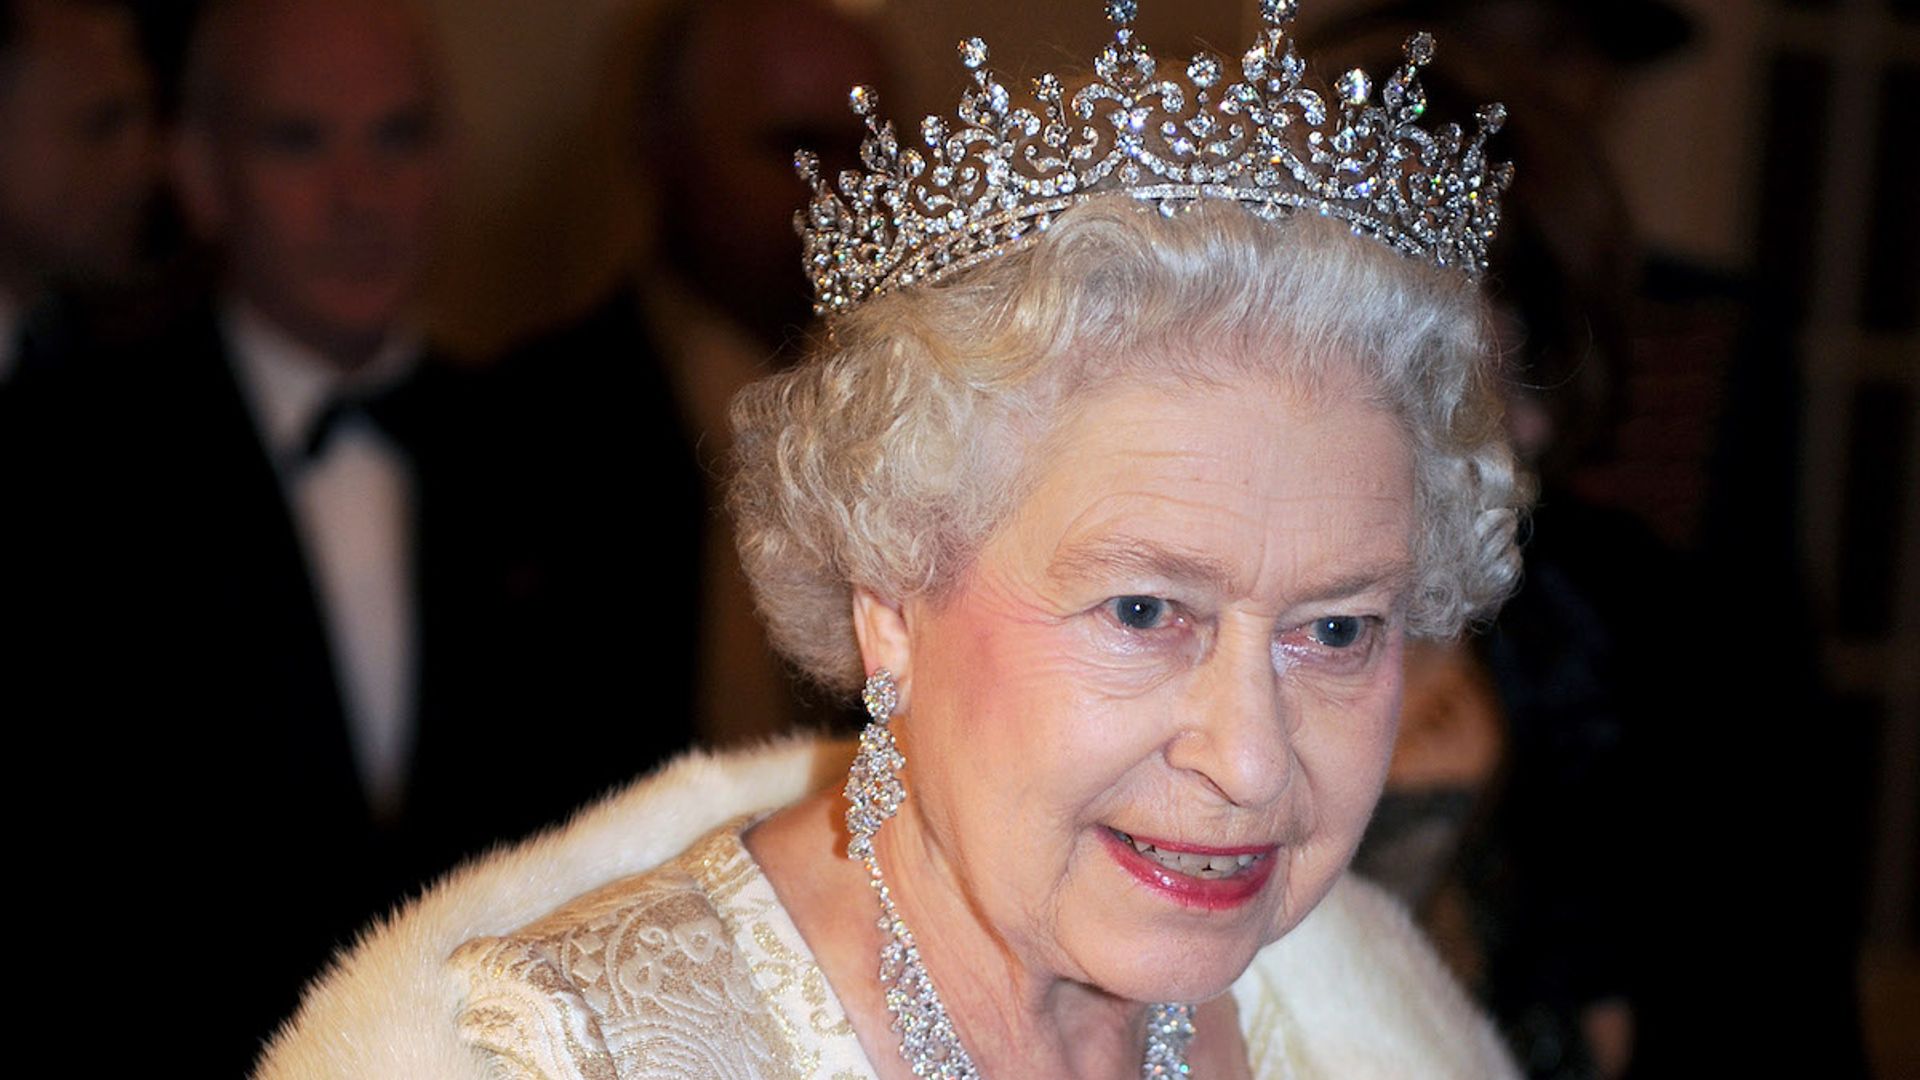 The Queen dismantles wedding gift tiara for sparkling jewellery piece ...